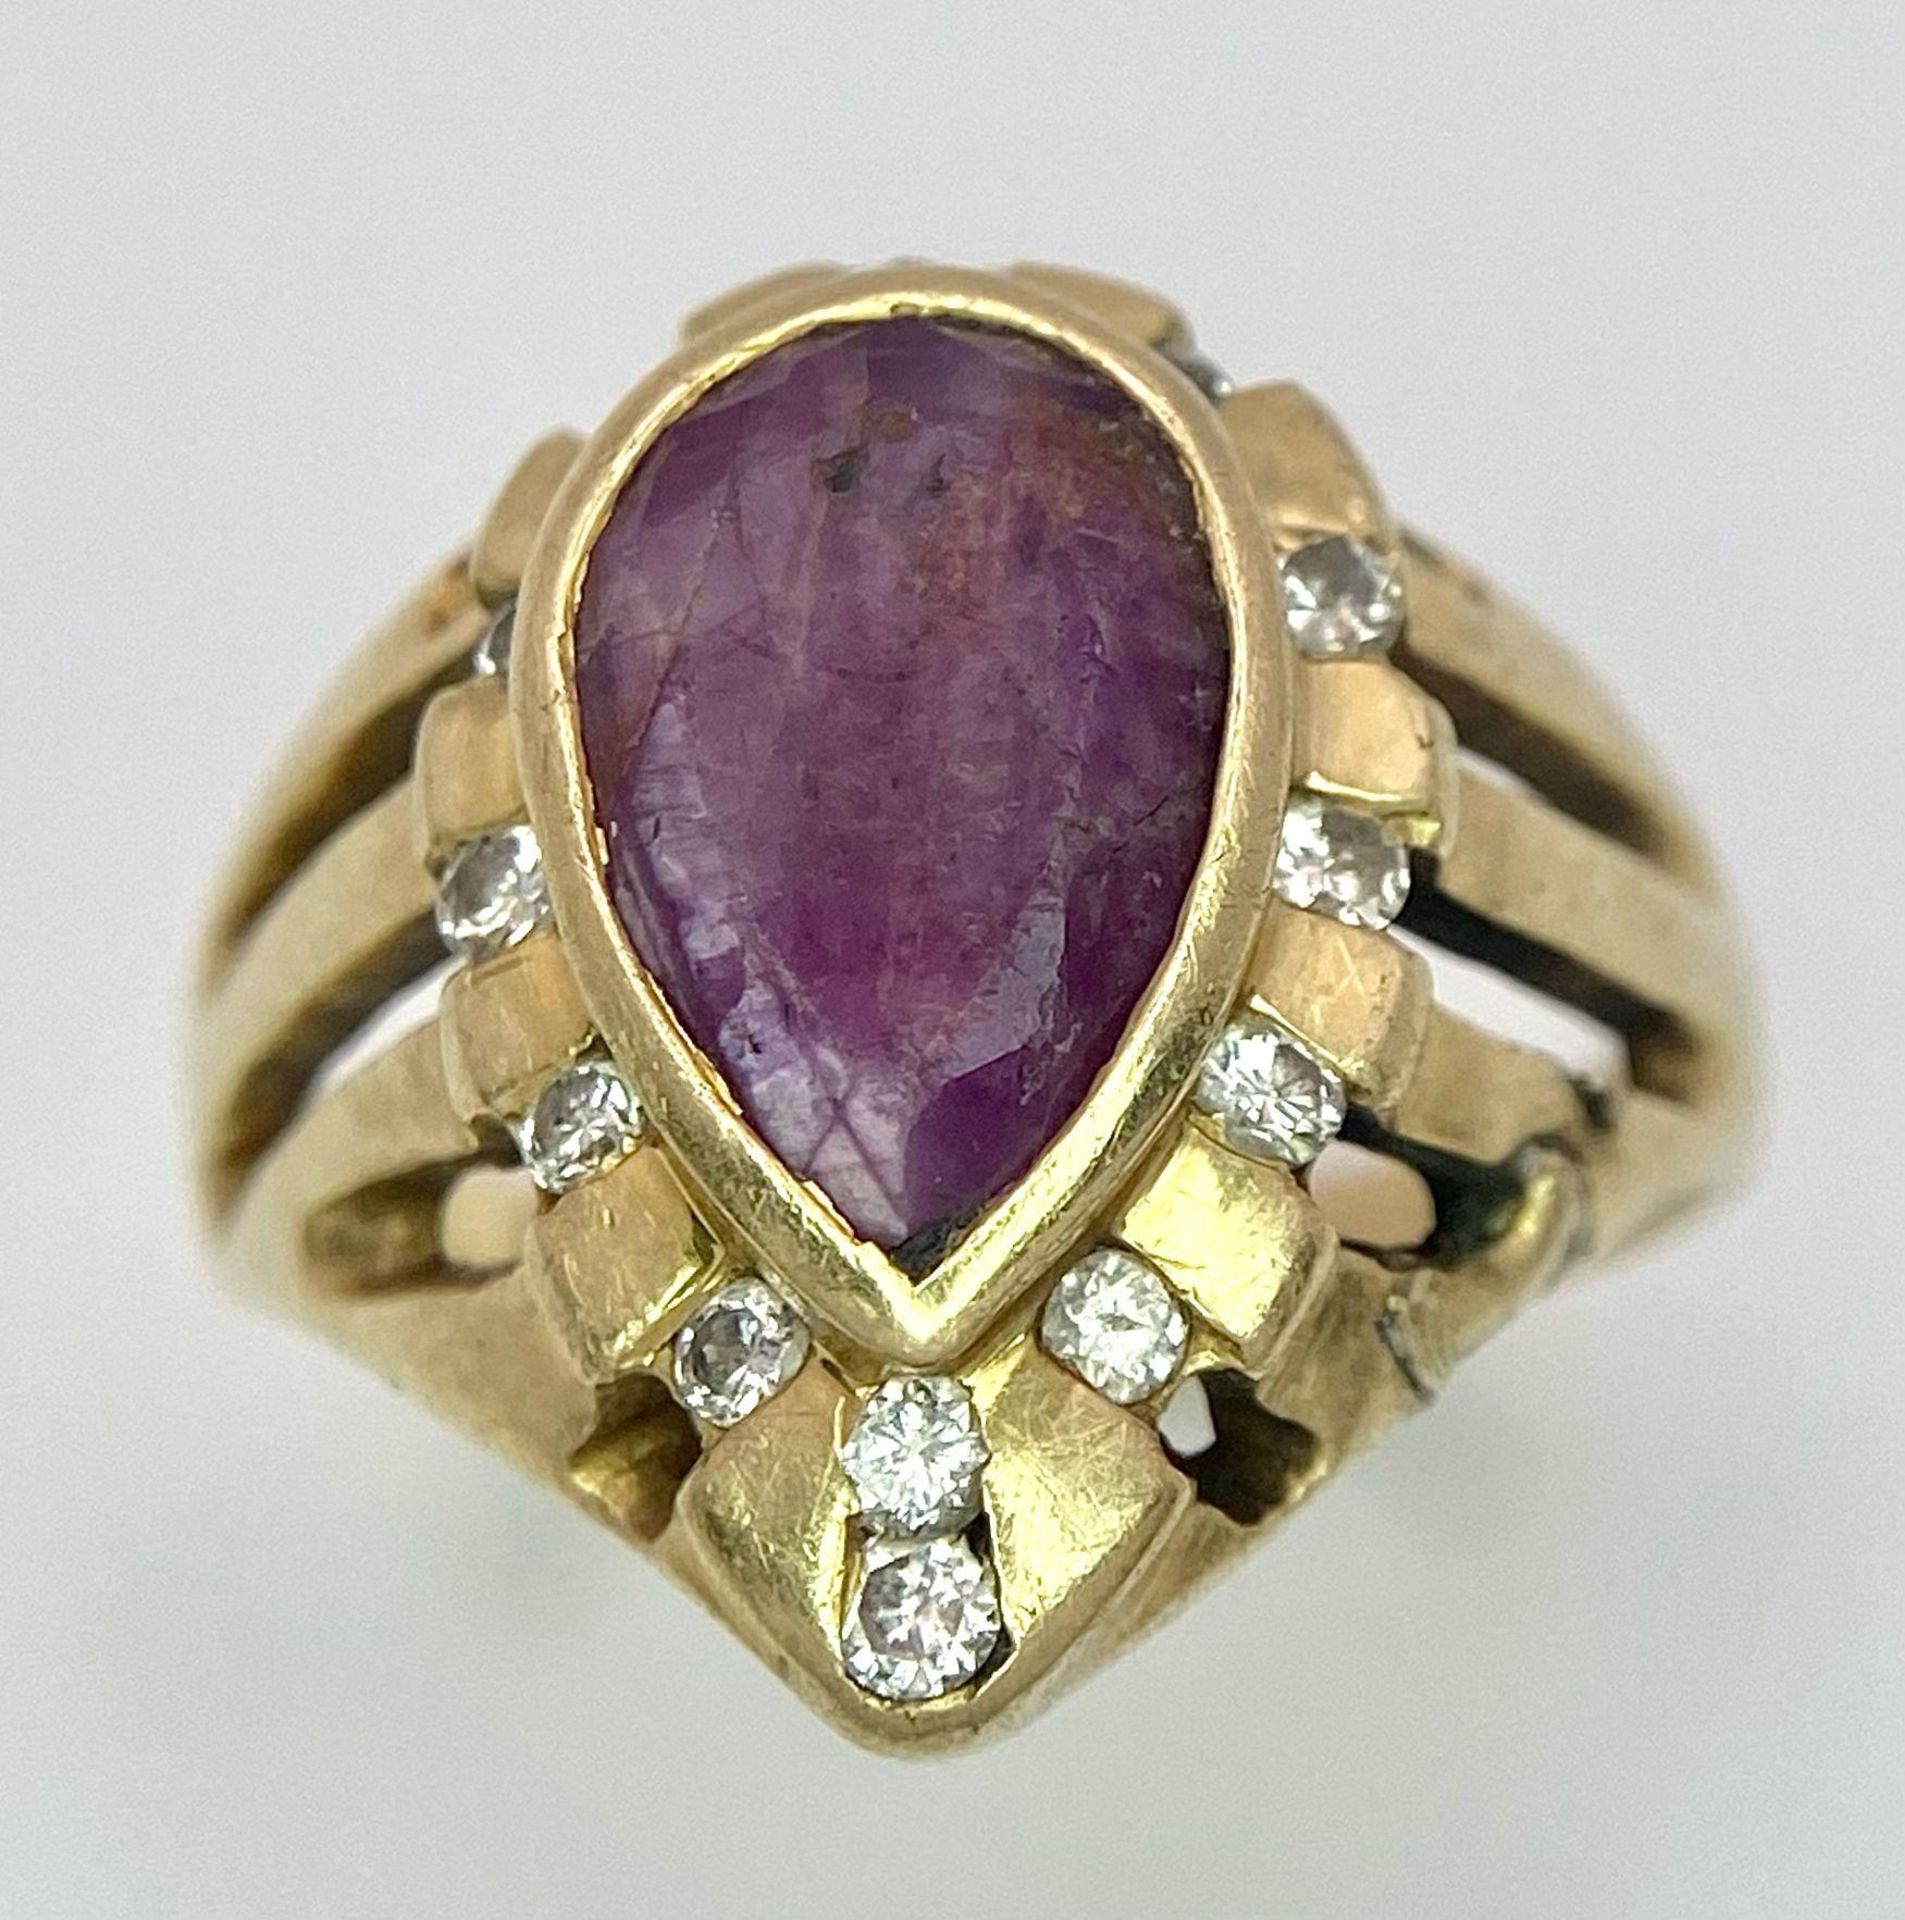 A Vintage 14K Yellow Gold Amethyst and Diamond Ring. Teardrop central amethyst with a diamond